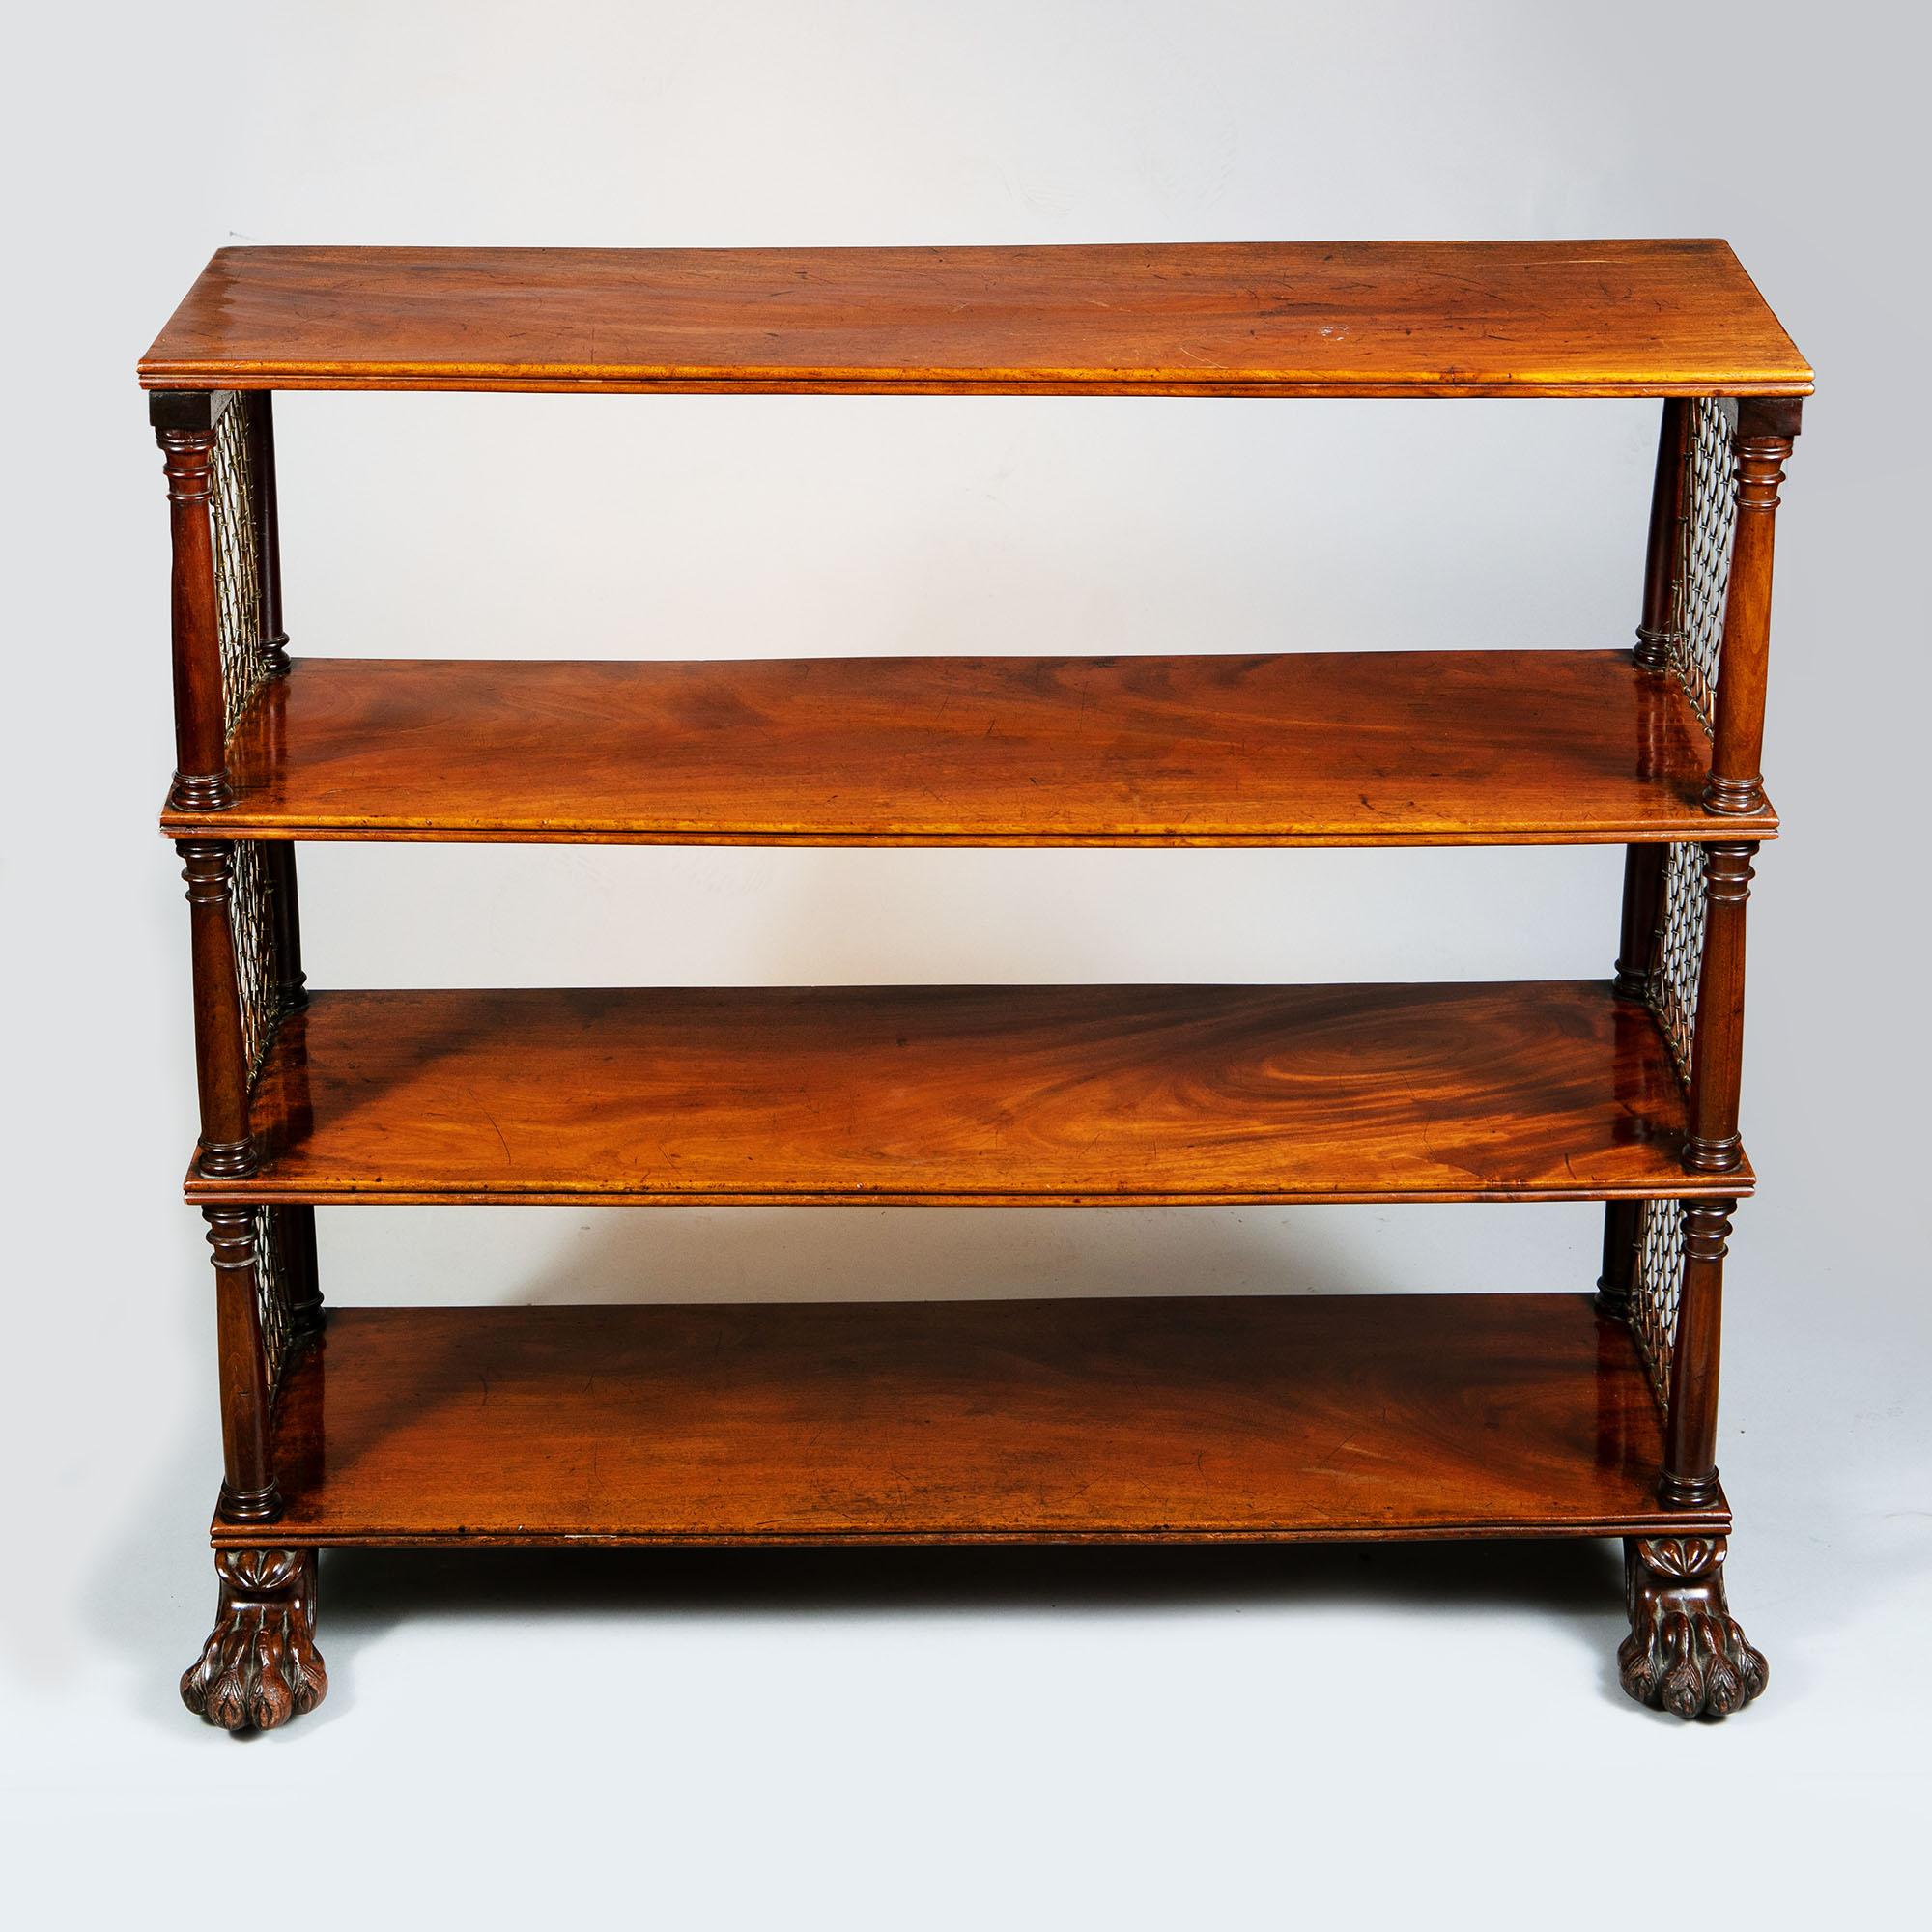 Nicholas Wells antiques is pleased to present this elegant set of shelves constructed with four planks of fine highly figured flame mahogany with simple moulded fronts and sides, supported on three sets of four Tuscan Doric columns with the original